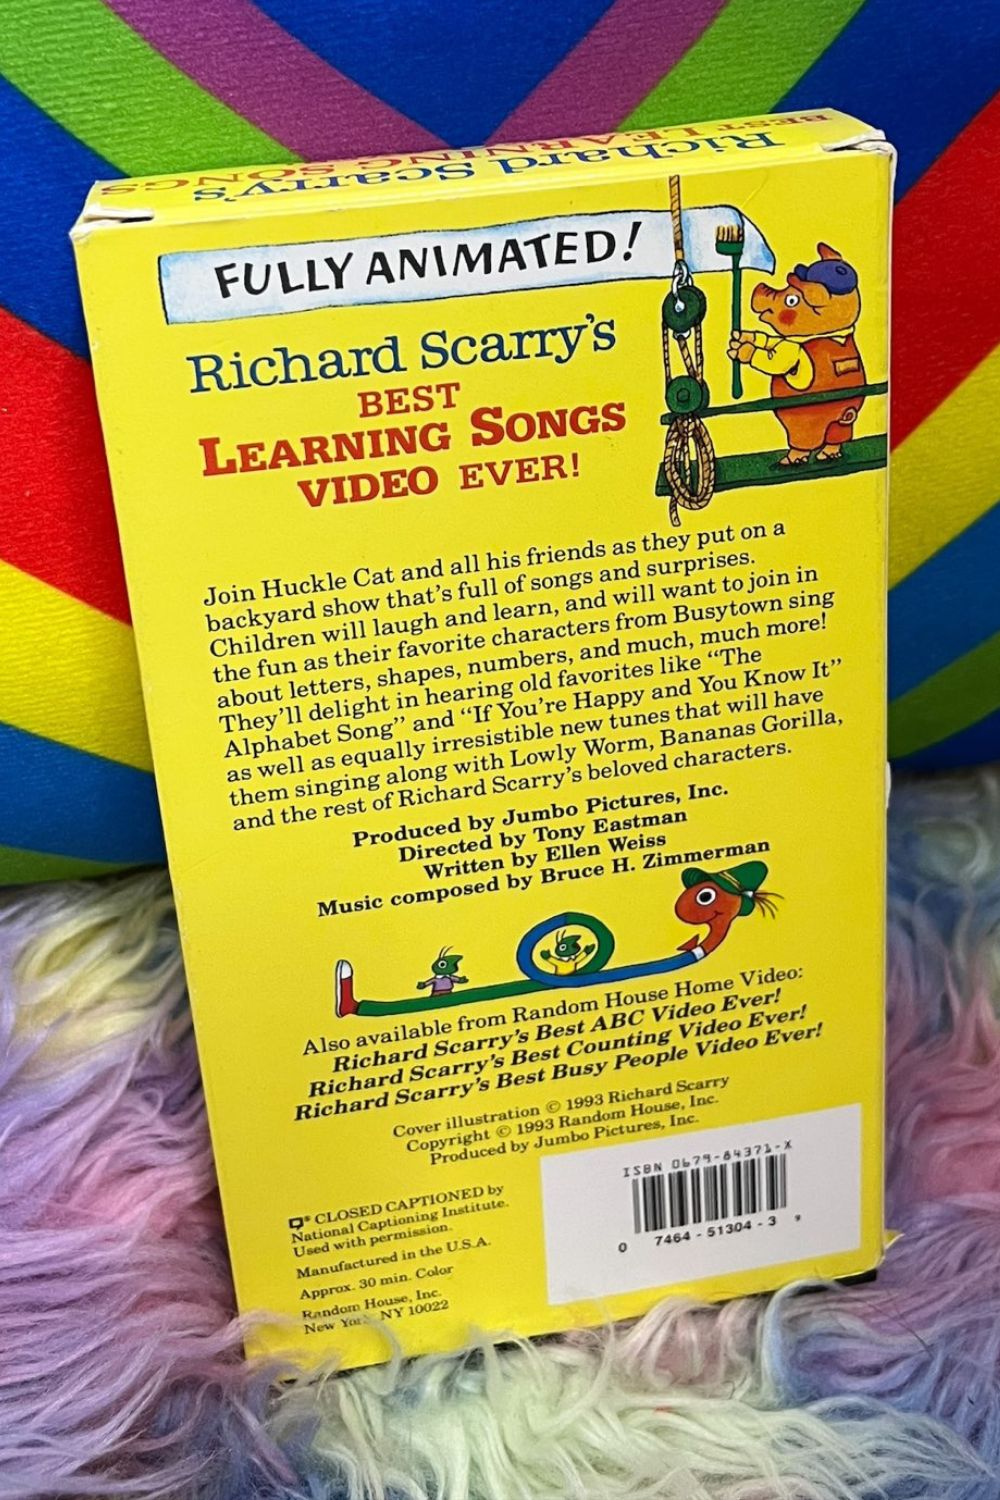 RICHARD SCARRY'S BEST LEARNING SONG VHS*